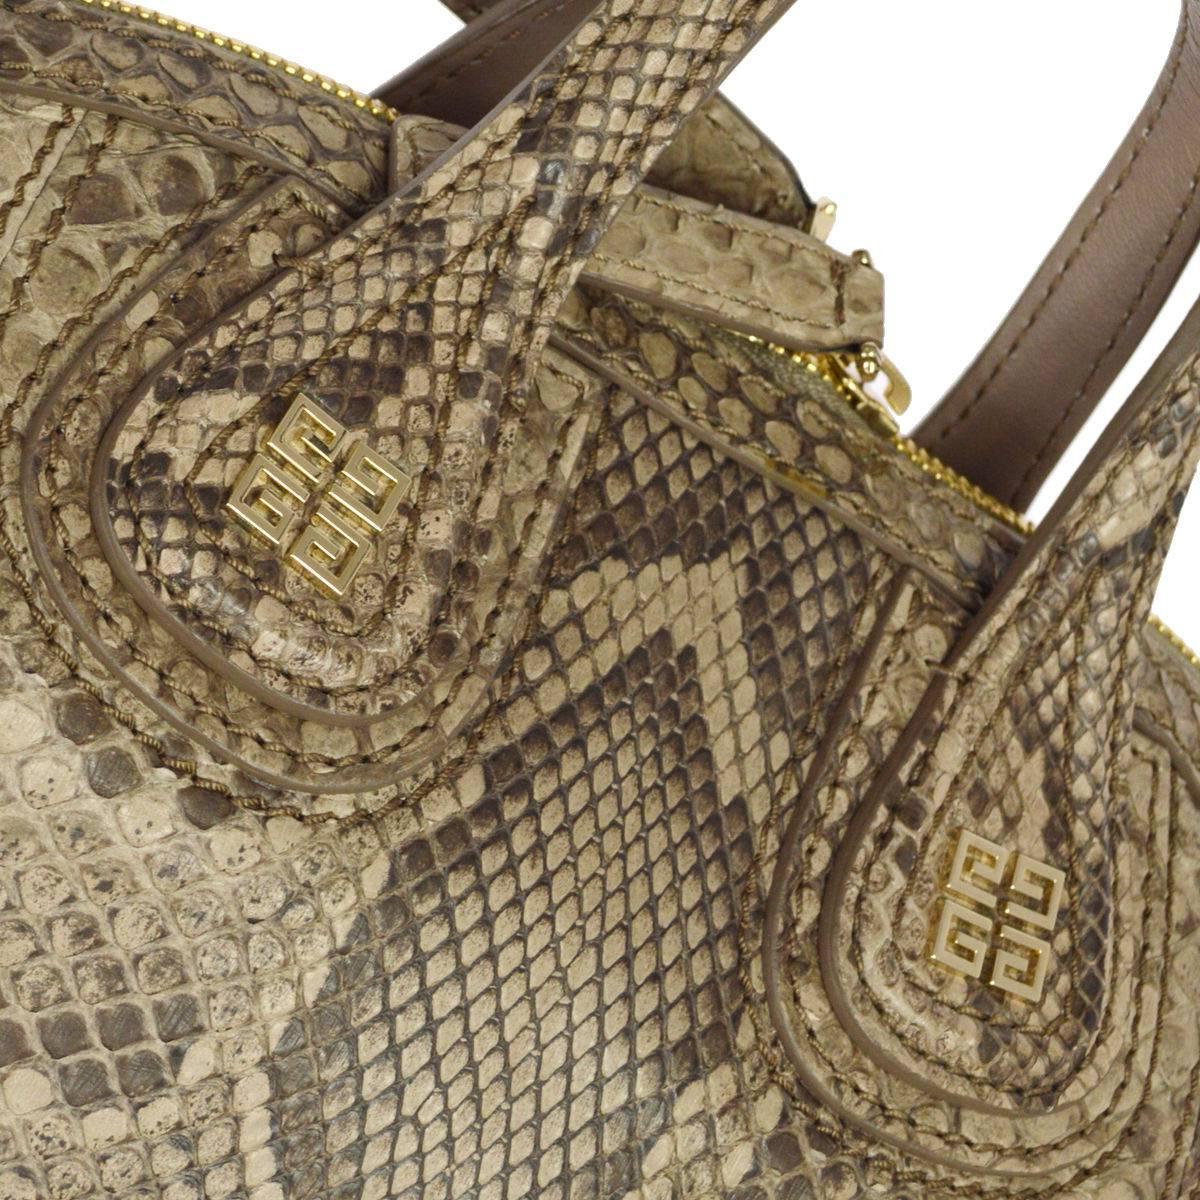 CURATOR'S NOTES

Givenchy Snakeskin Nightingale Carryall Travel Top Handle Satchel Tote Shoulder Bag  

Snakeskin
Gold tone hardware
Zipper closure
Leather lining
Made in Italy
Handle drop 4"
Removable shoulder strap drop 24"
Measures